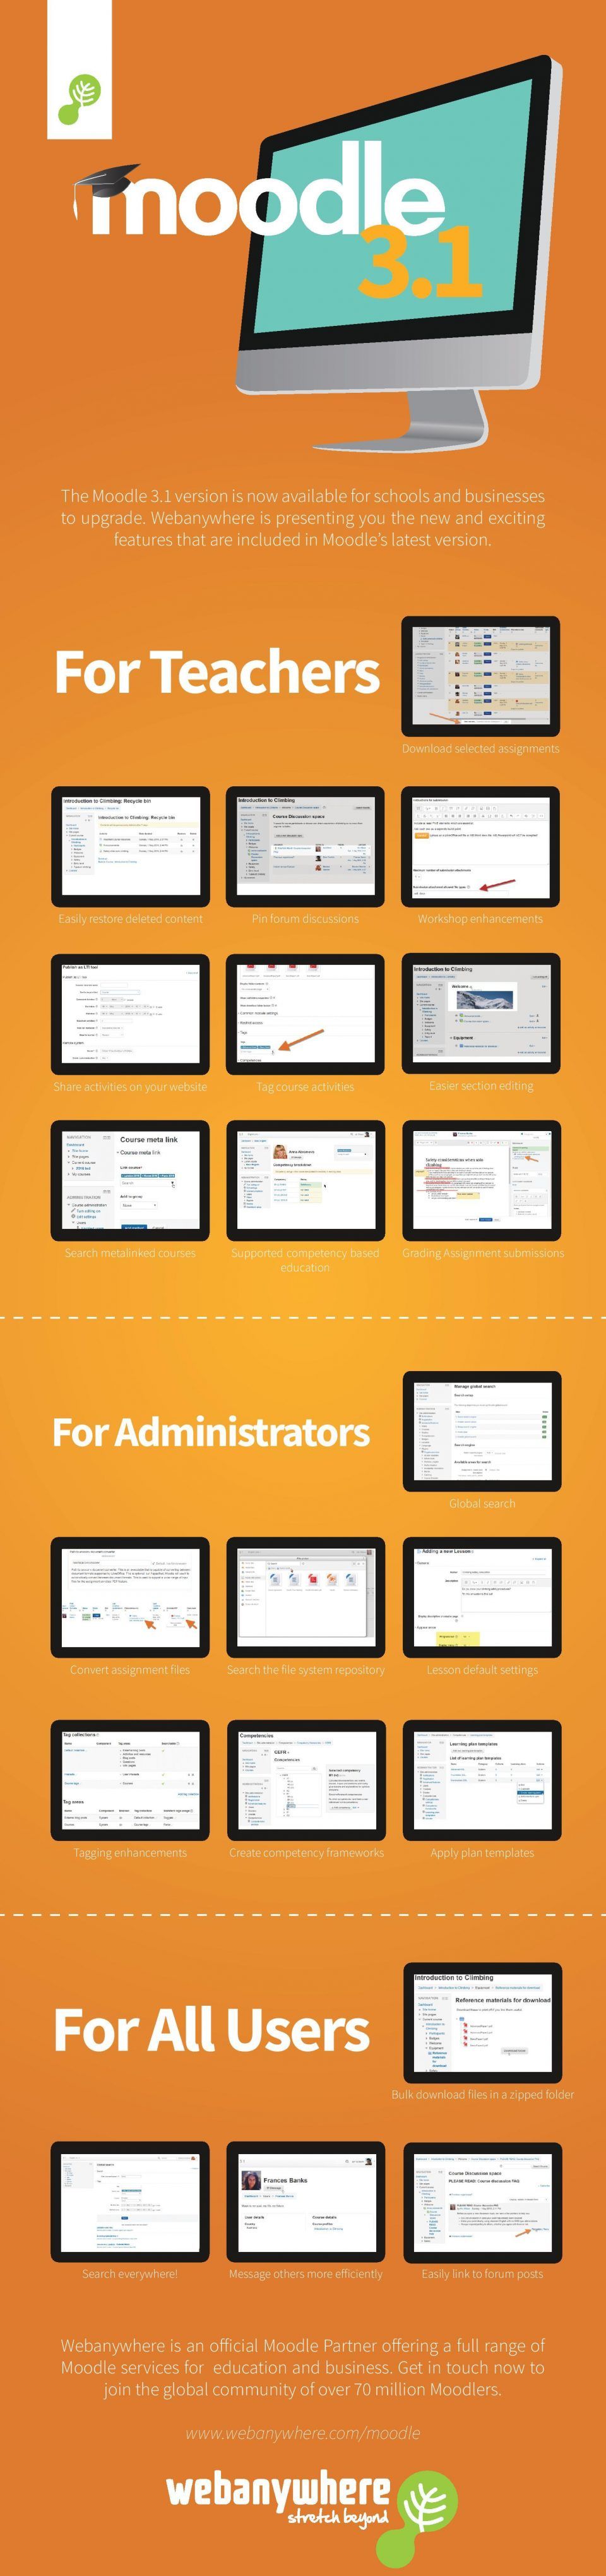 Moodle 3.1 New Features Infographic